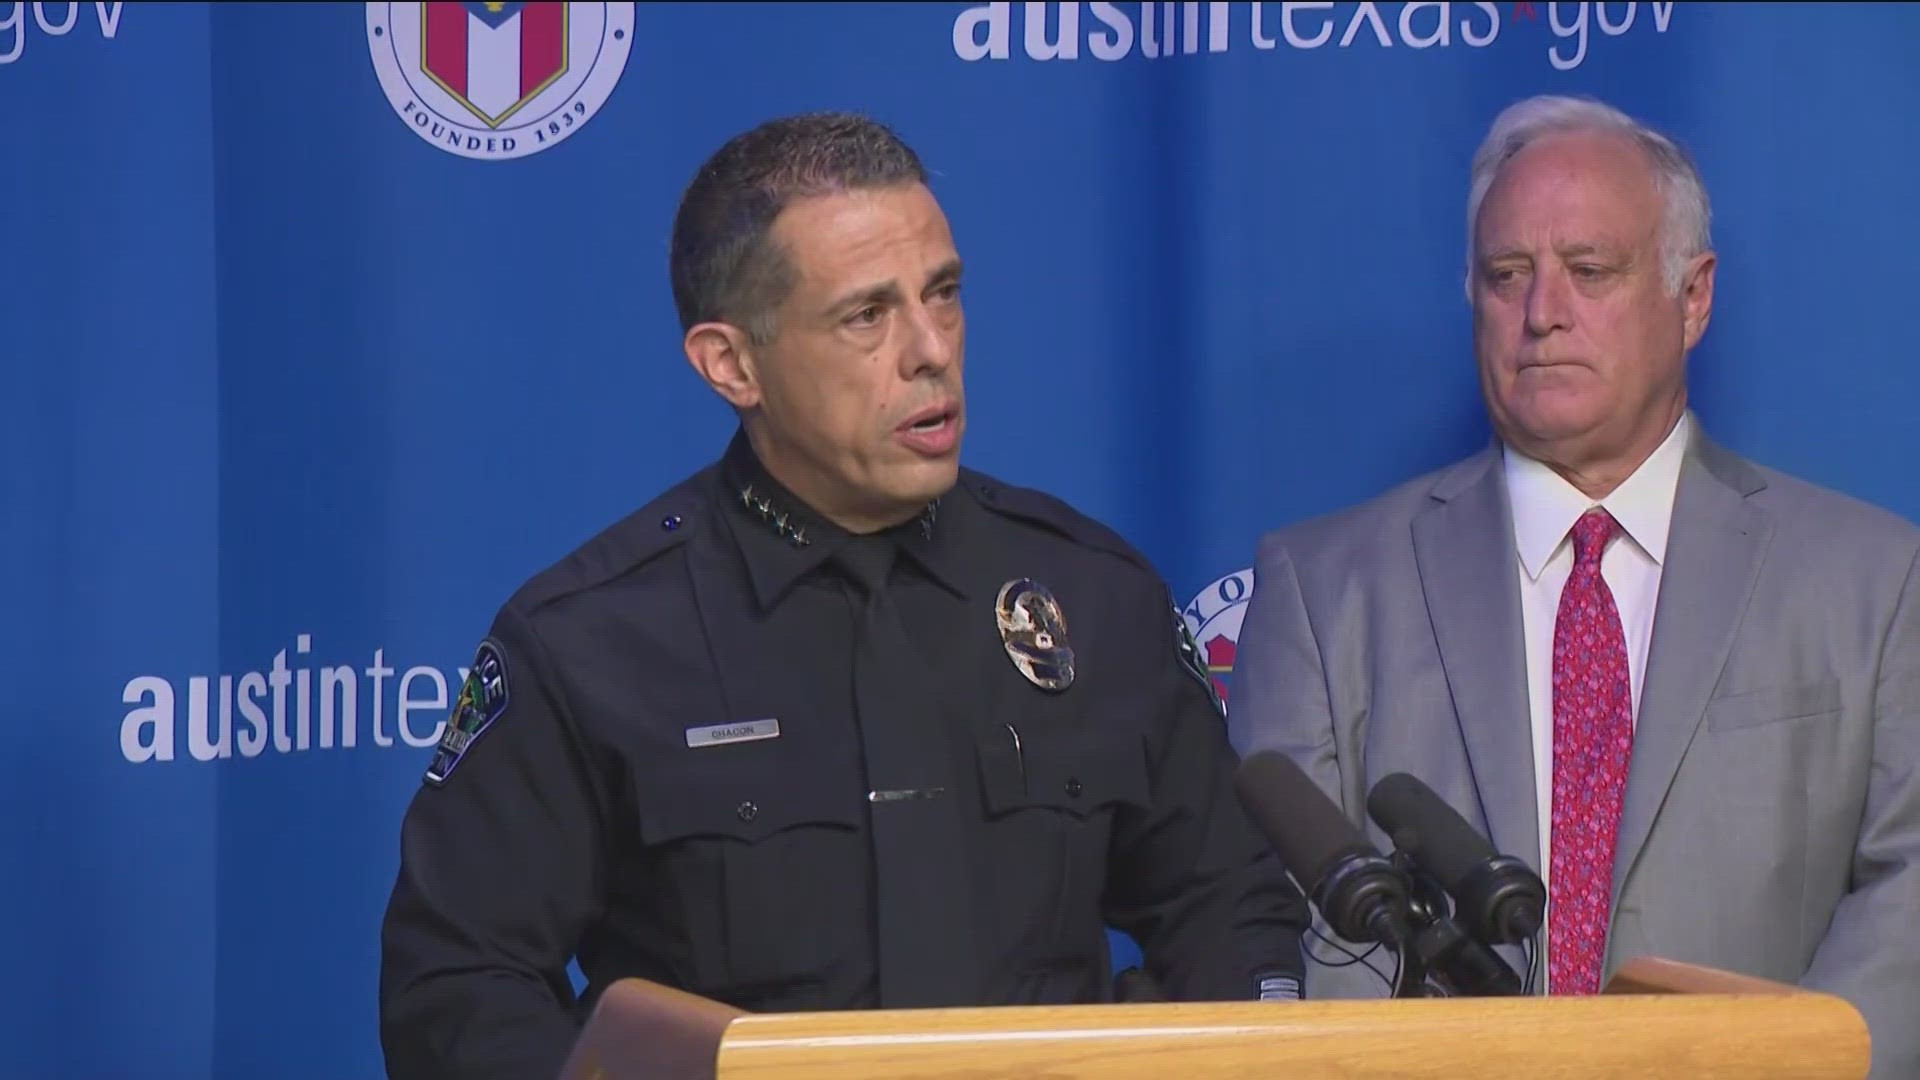 The Austin Police Department says it will be teaming up with the Texas Department of Public Safety to help address staffing shortages.